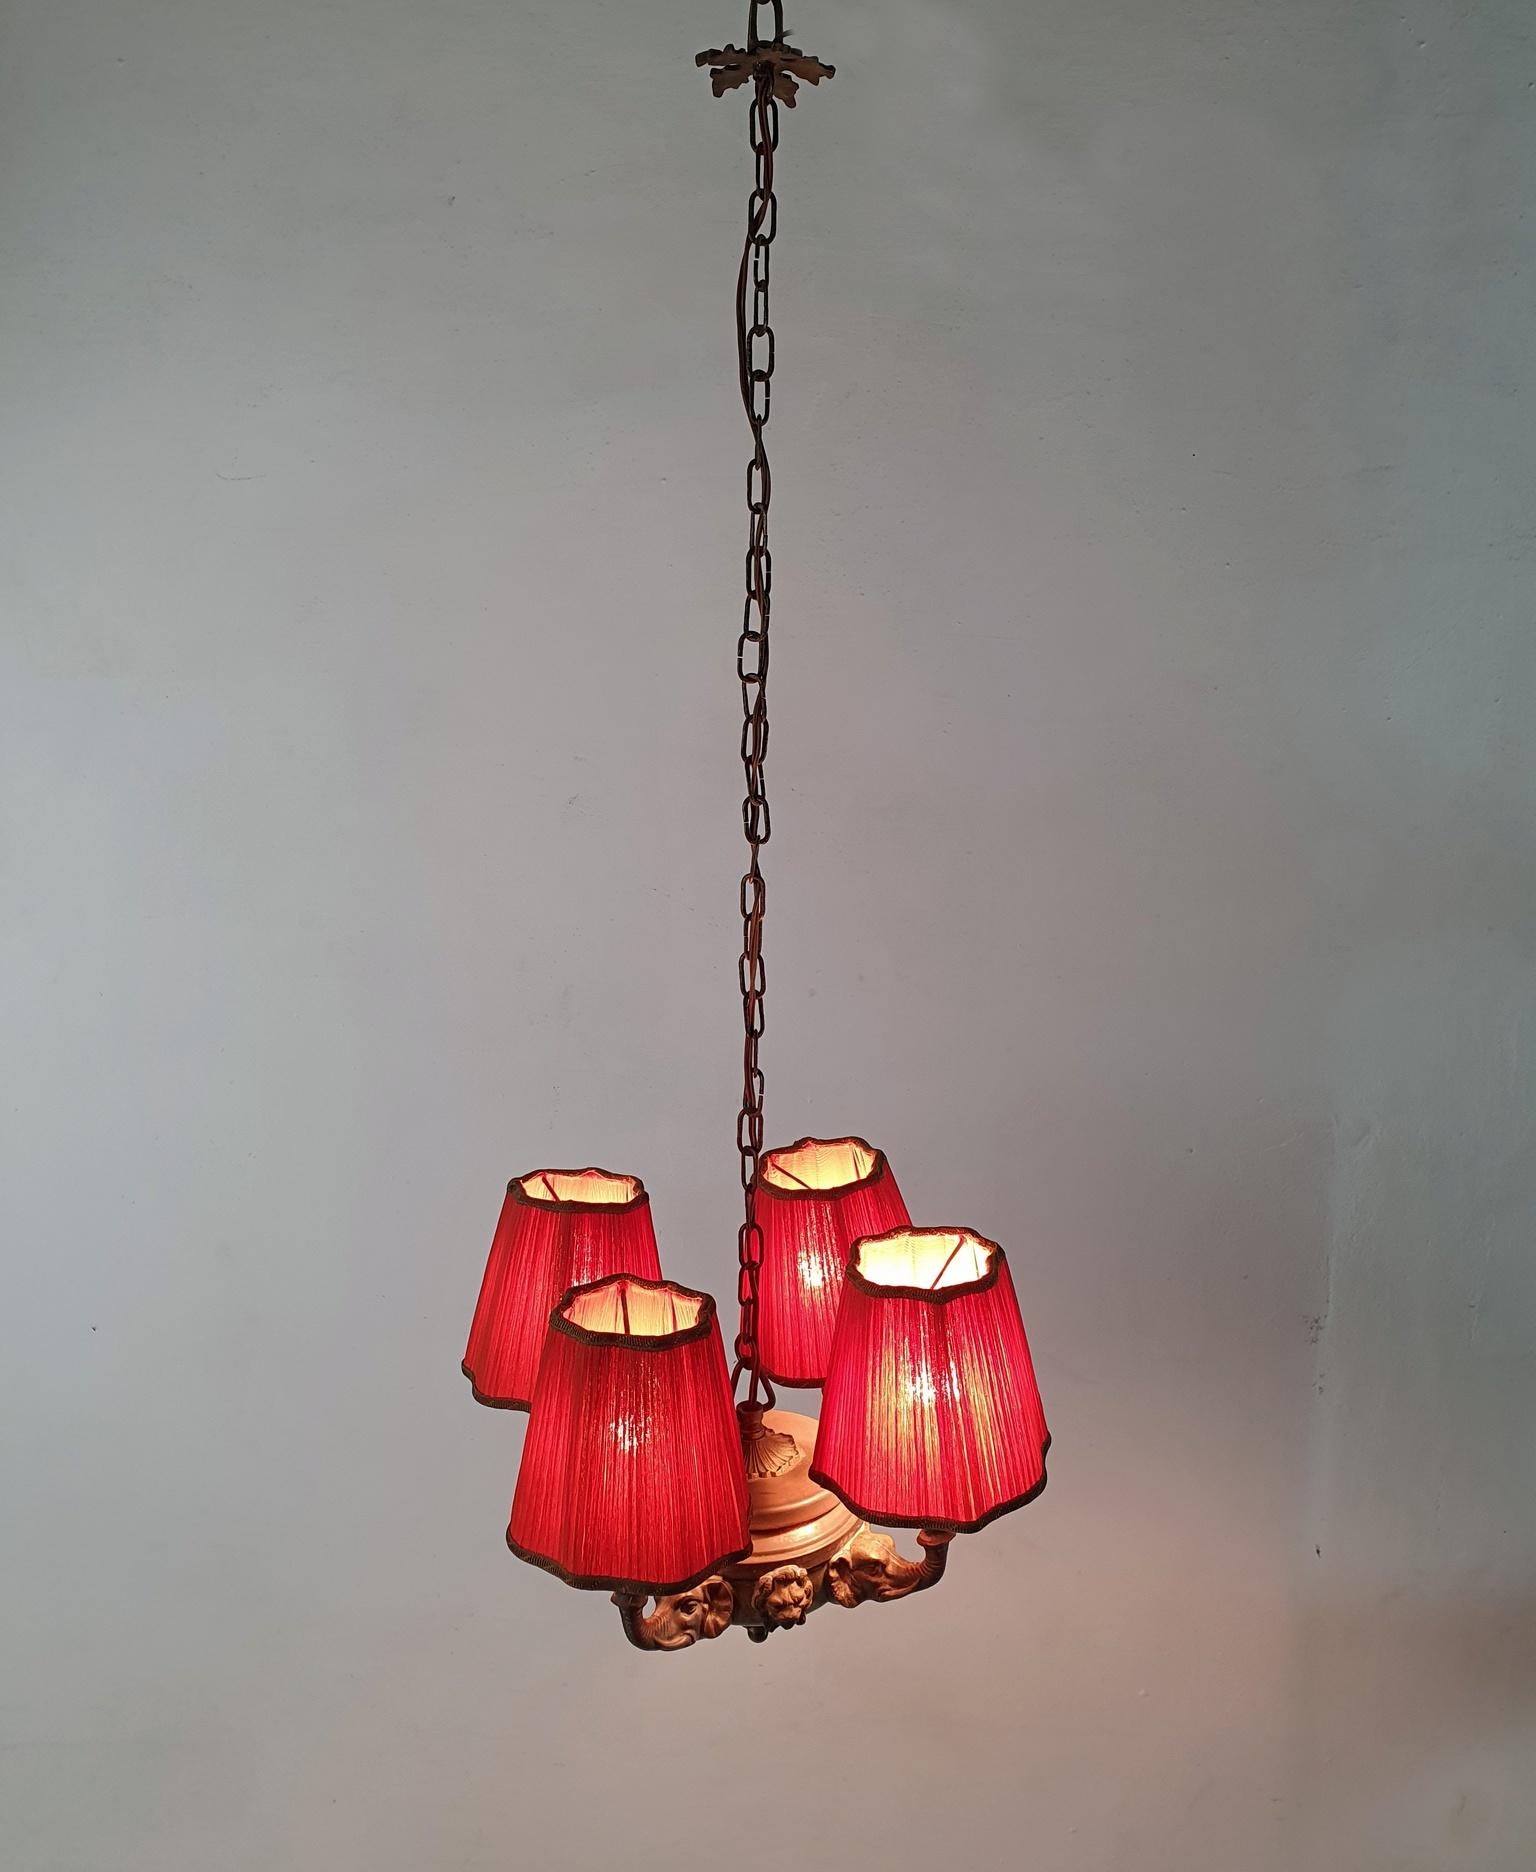 This pendant is simply unique and charming. Produced in France around the year 1900. It has four arms in the shape of elephant heads each holding up a lightbulb and are crowned with vintage lampshades in orange organza. Sold including lampshades.